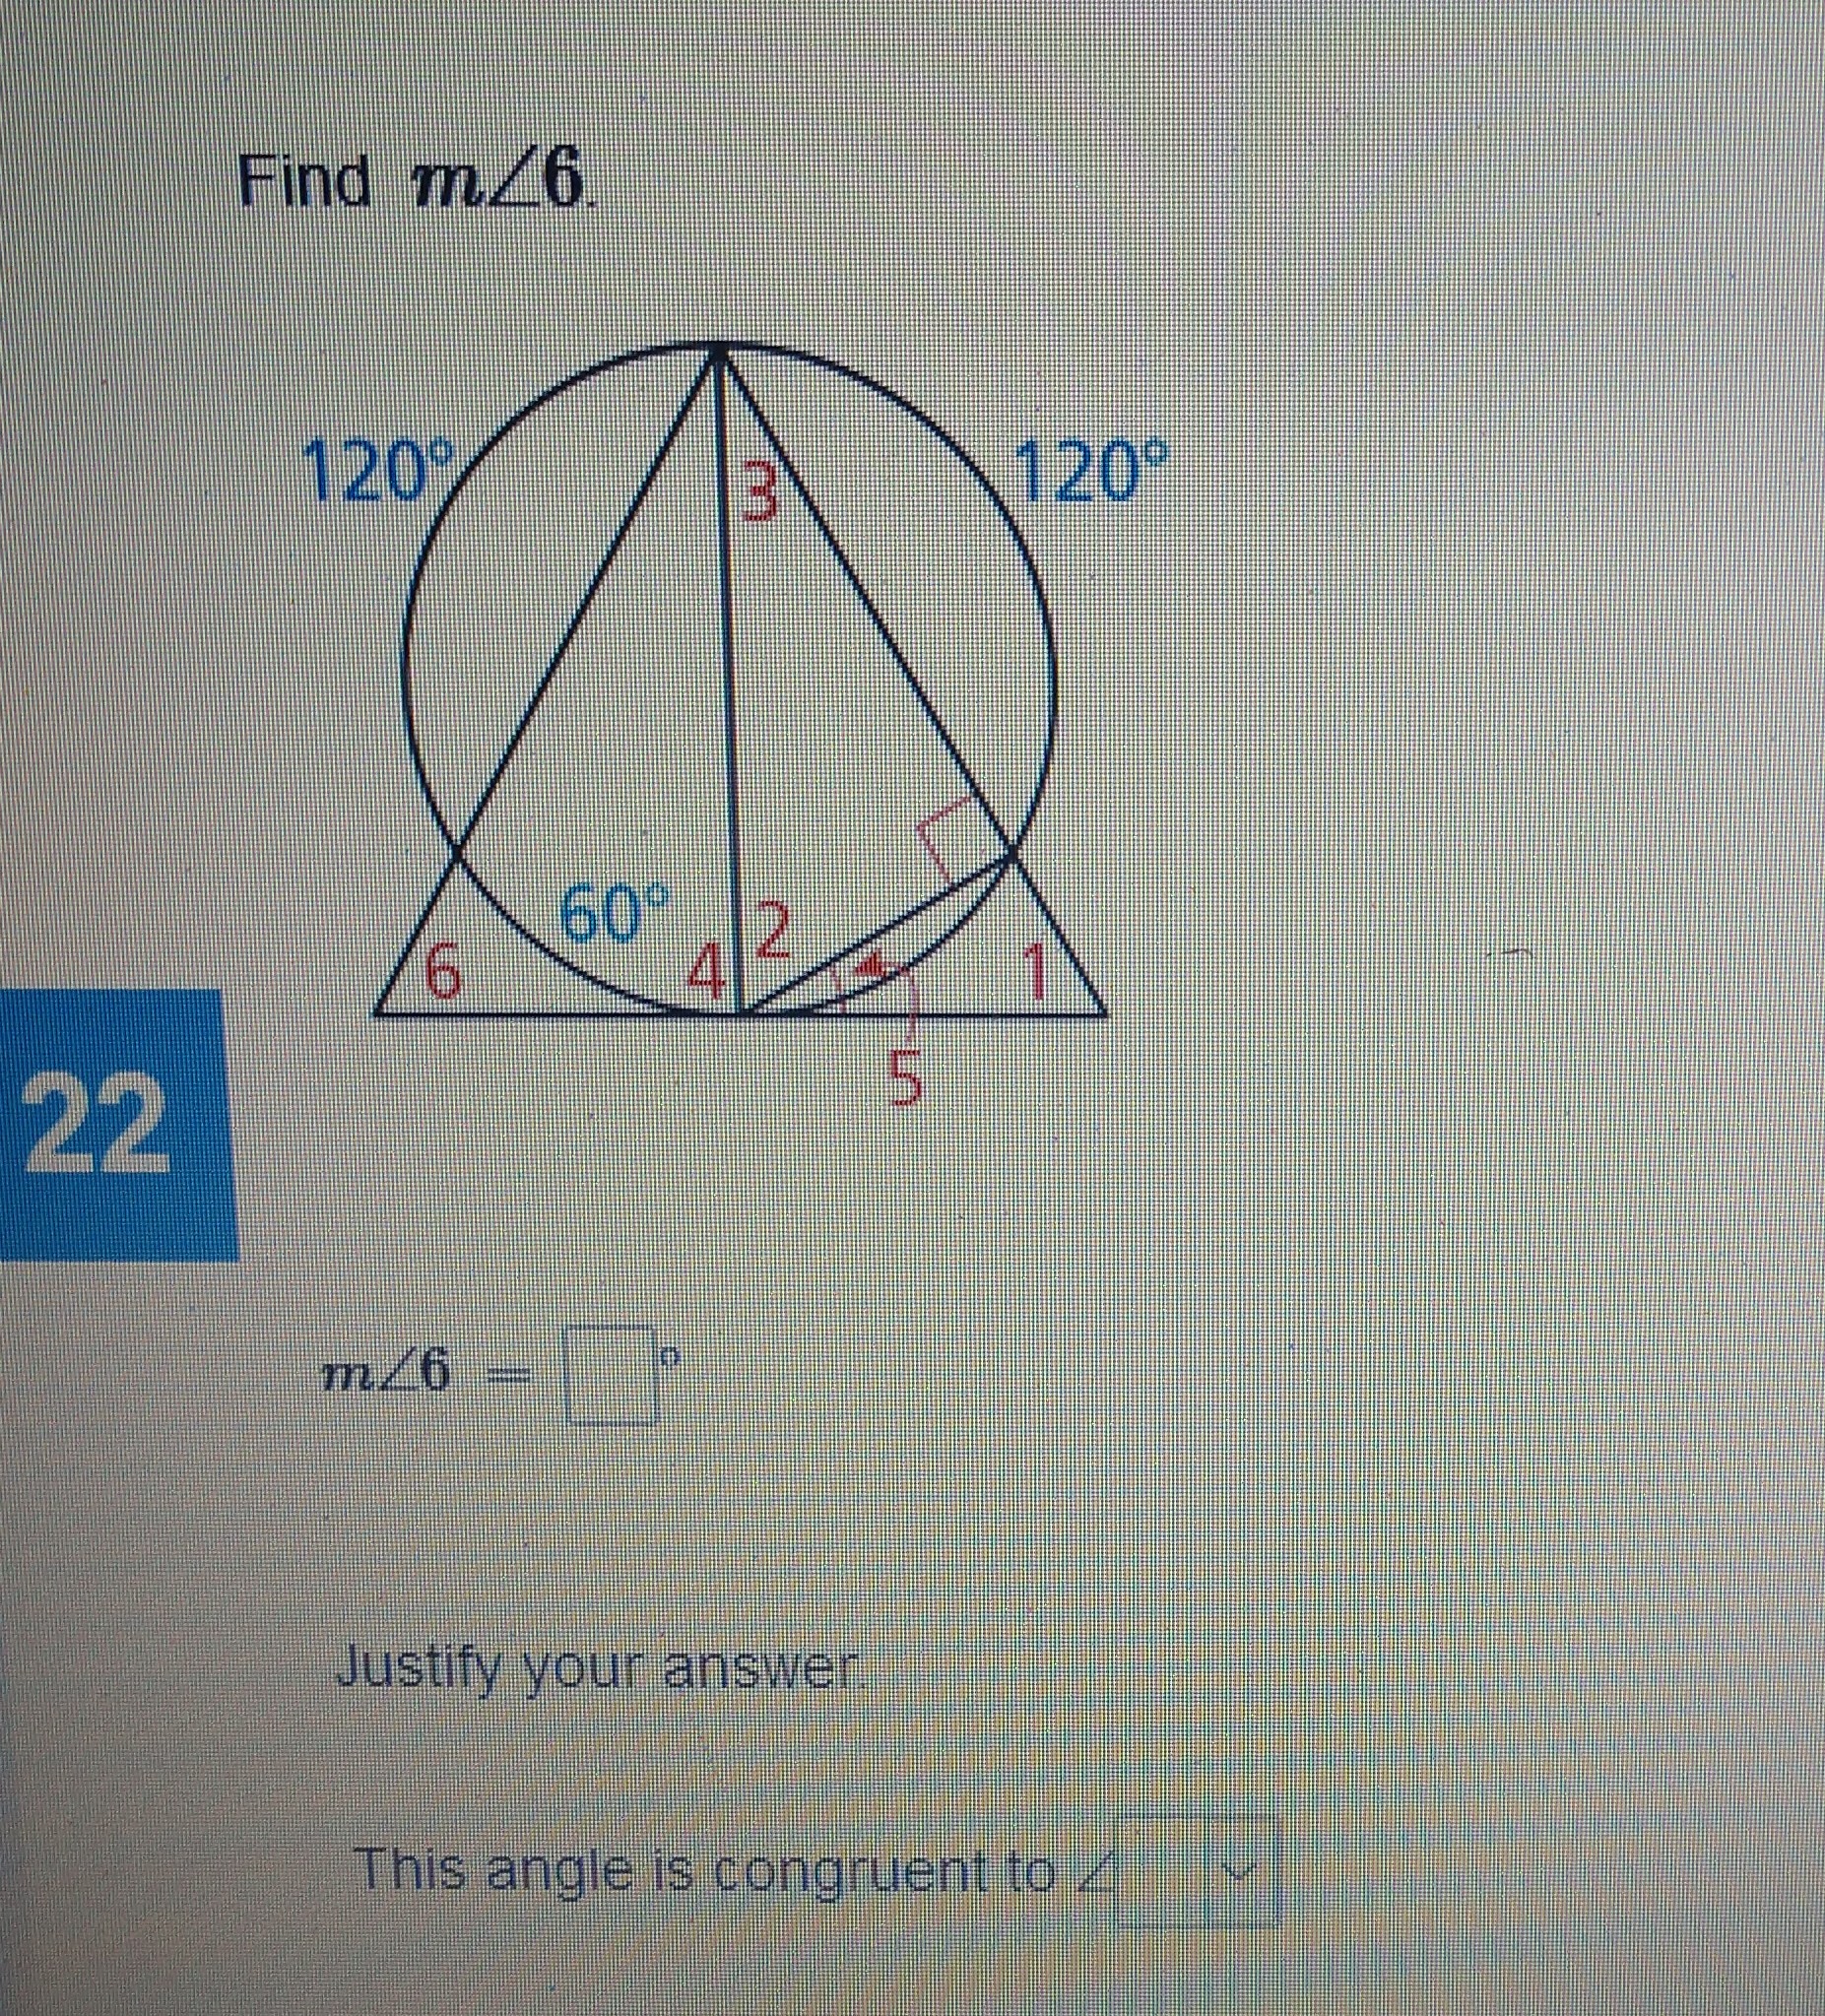 Find \( m \angle 6 \)
\( m \angle 6= \)
Justify your answer.
This angle is congruent to